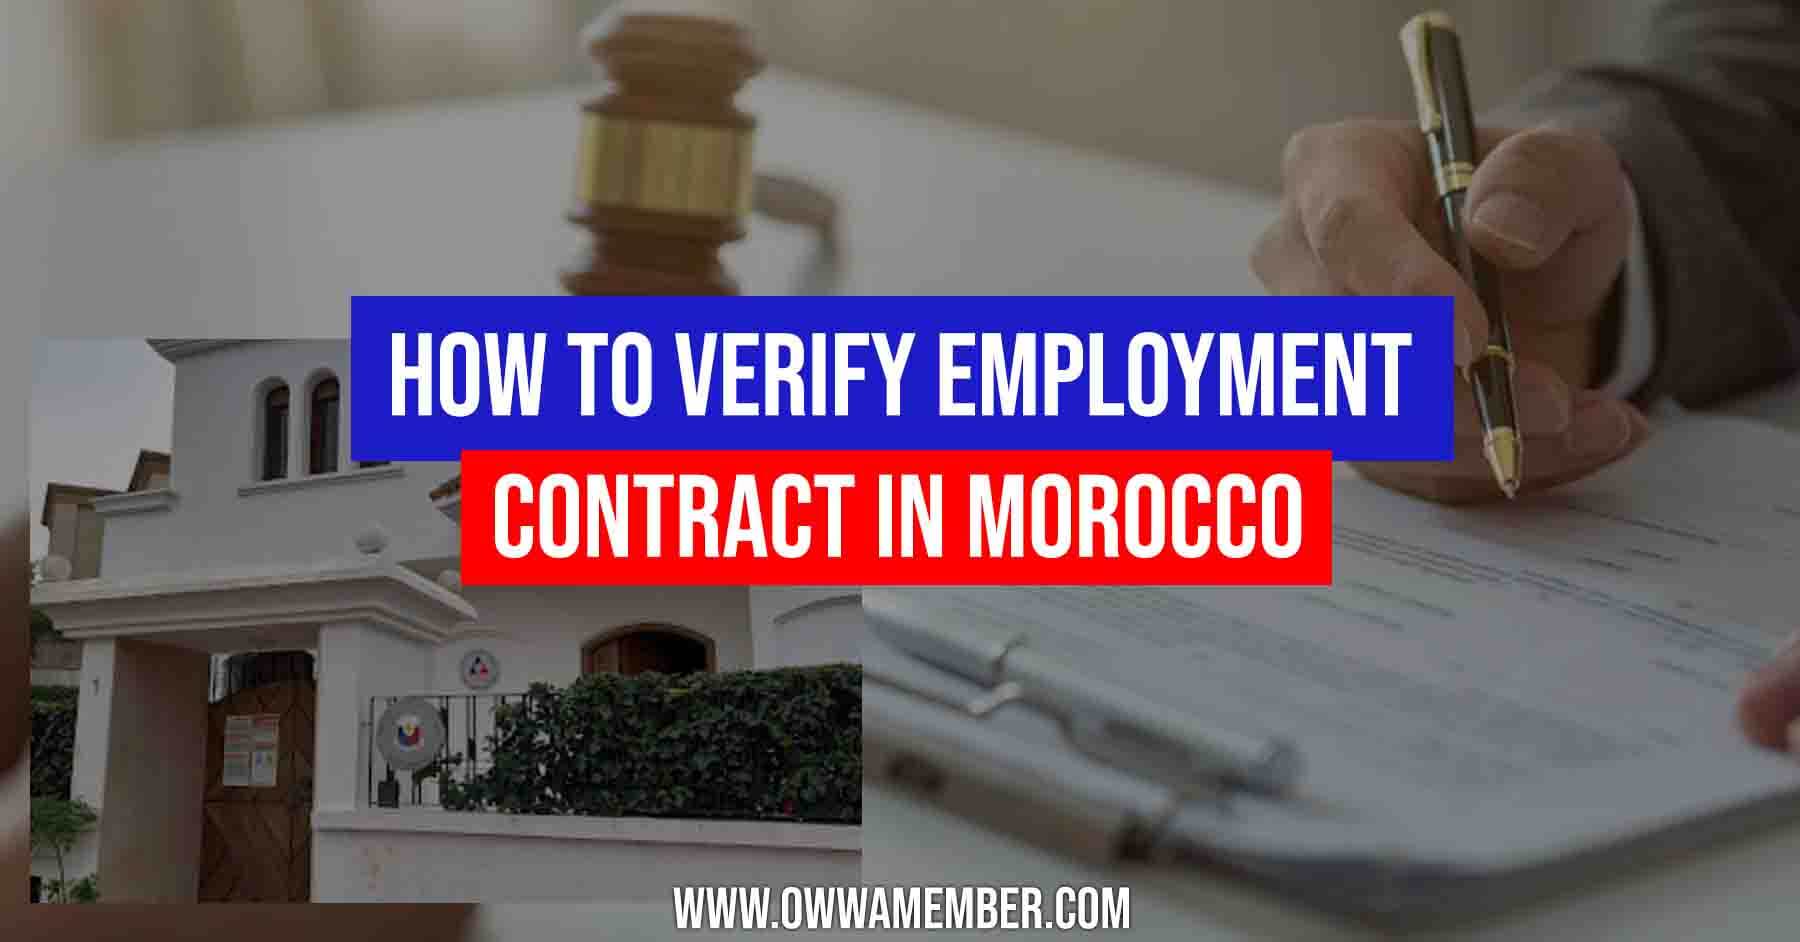 contract verification process in morocco